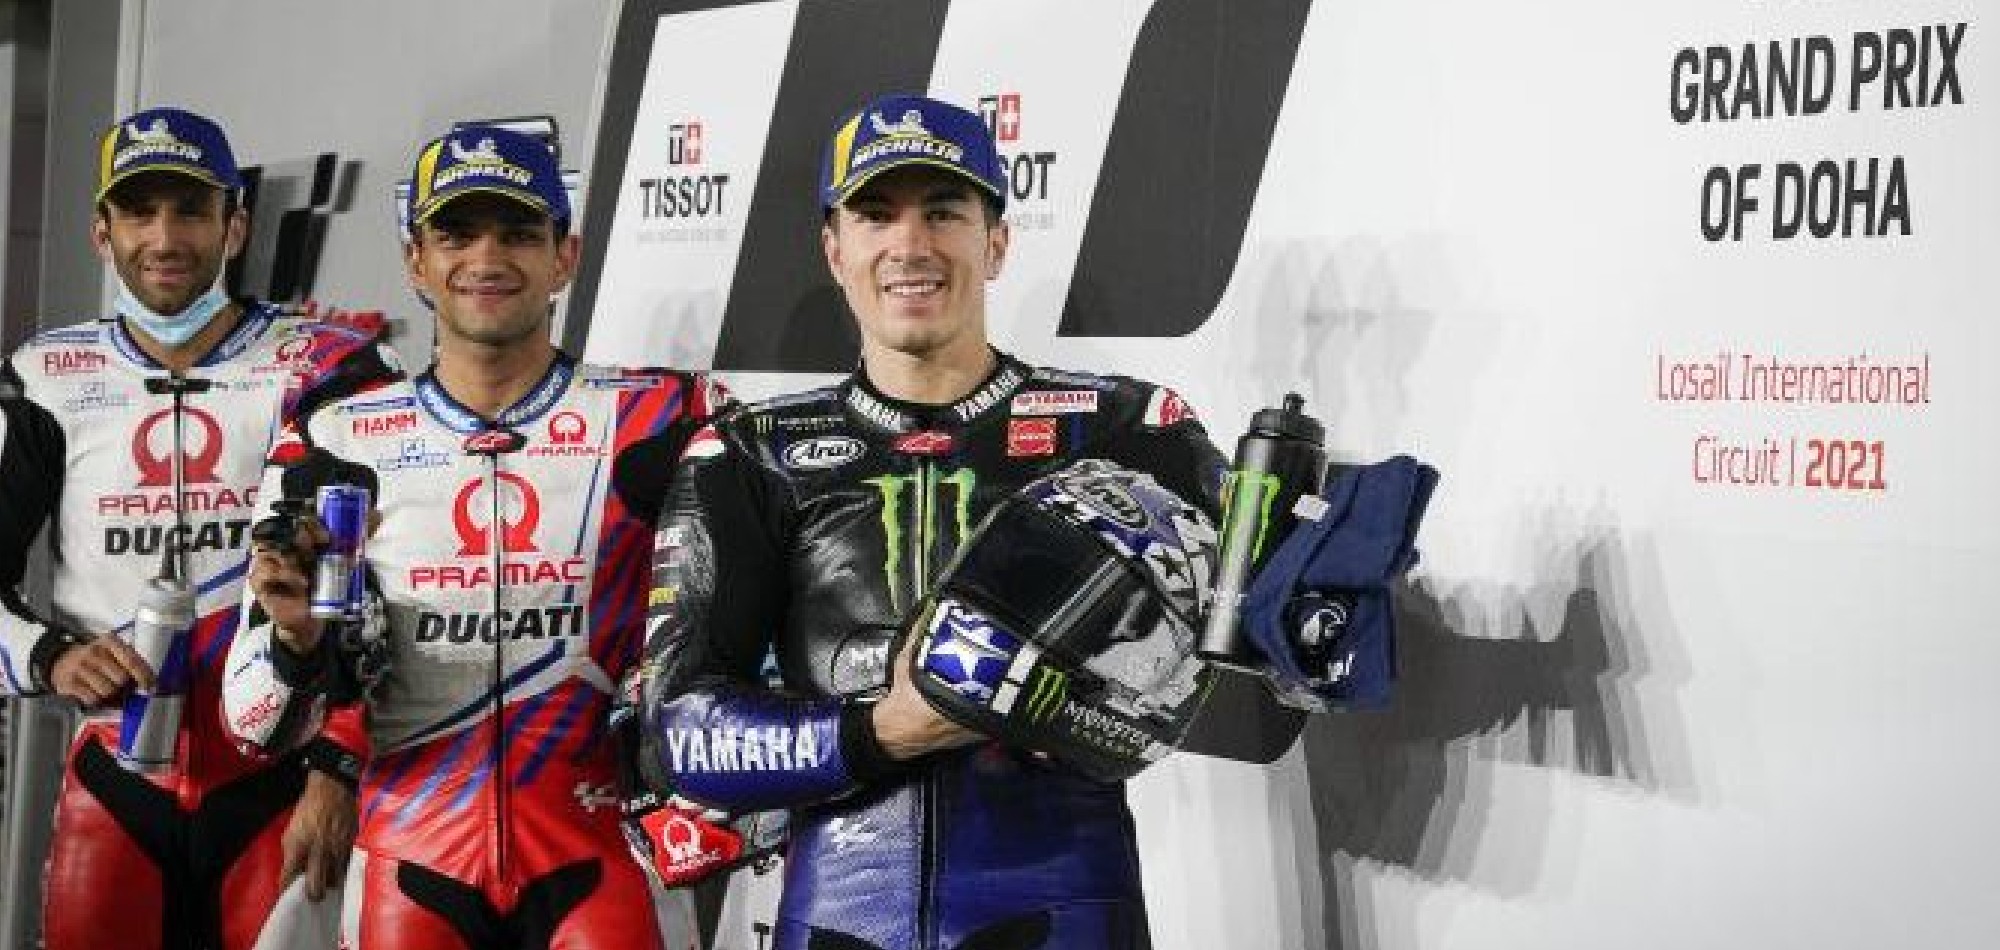 Martin storms to first MotoGP pole at Tissot Grand Prix of Doha